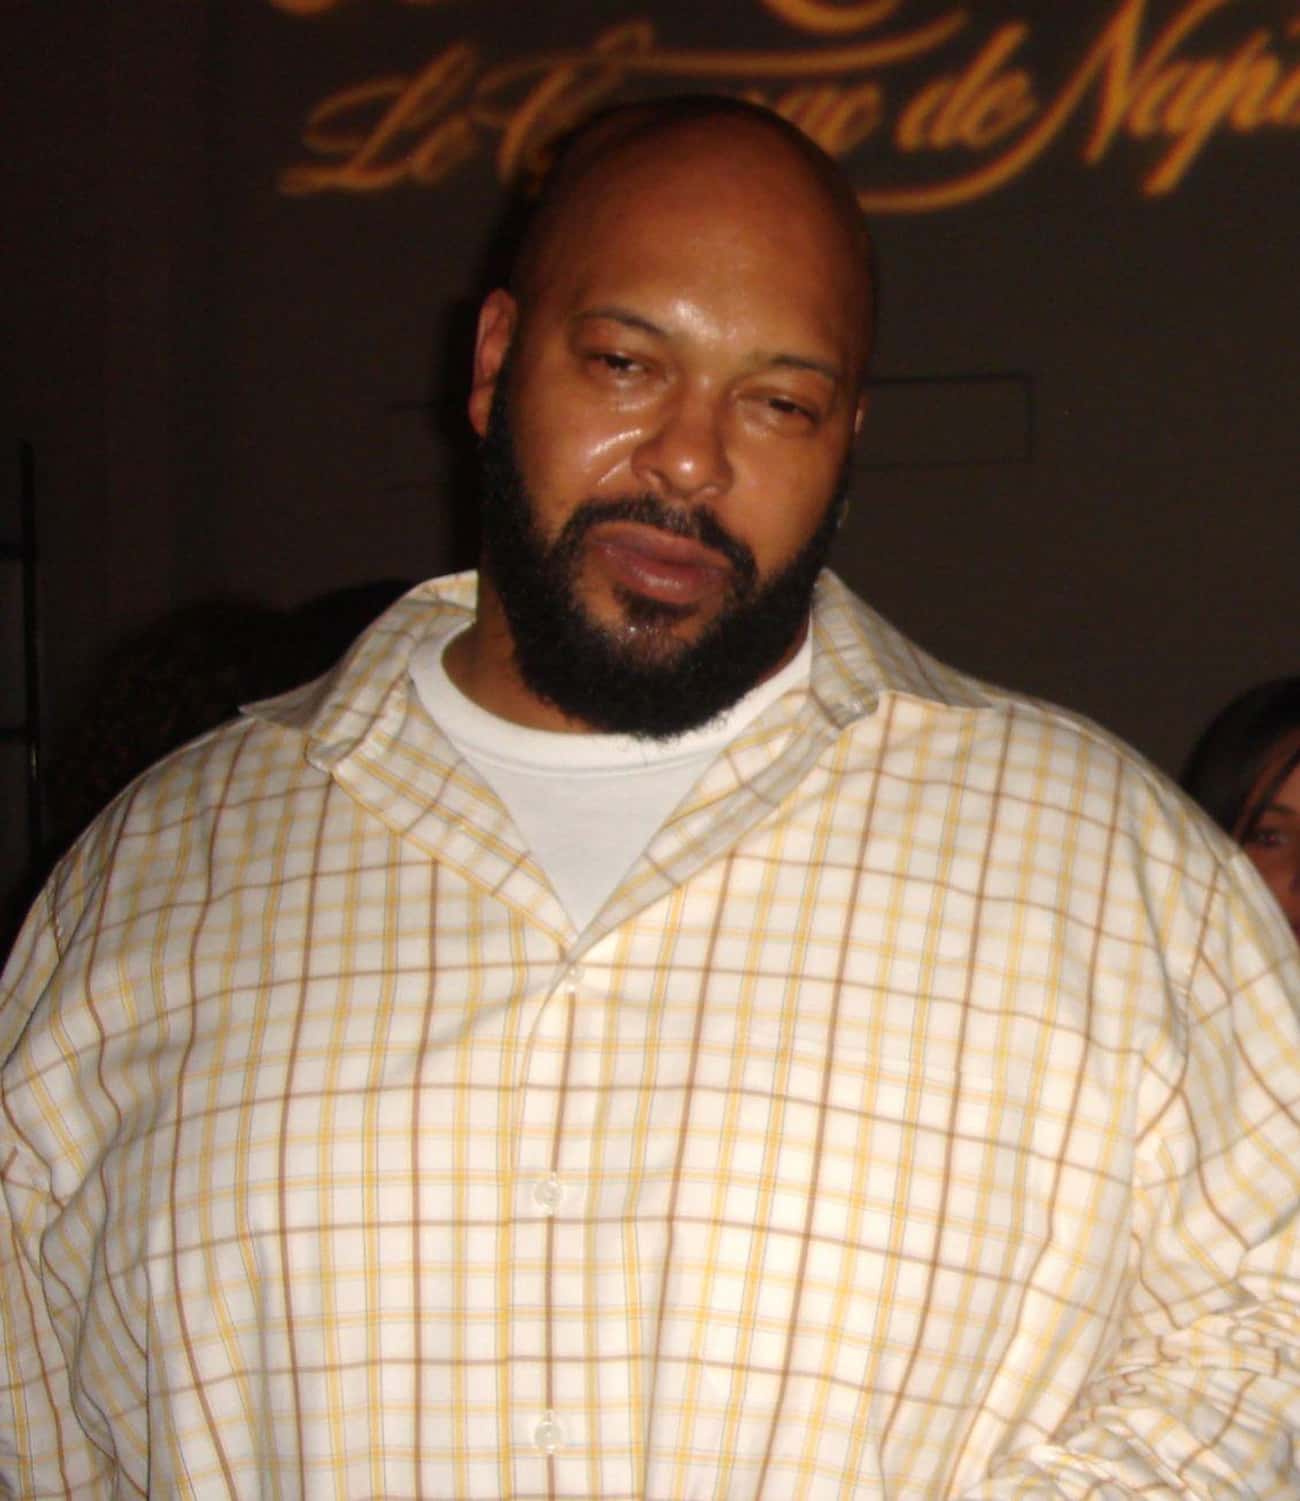 Marion "Suge" Knight Put Out A Hit On Tupac Over Money